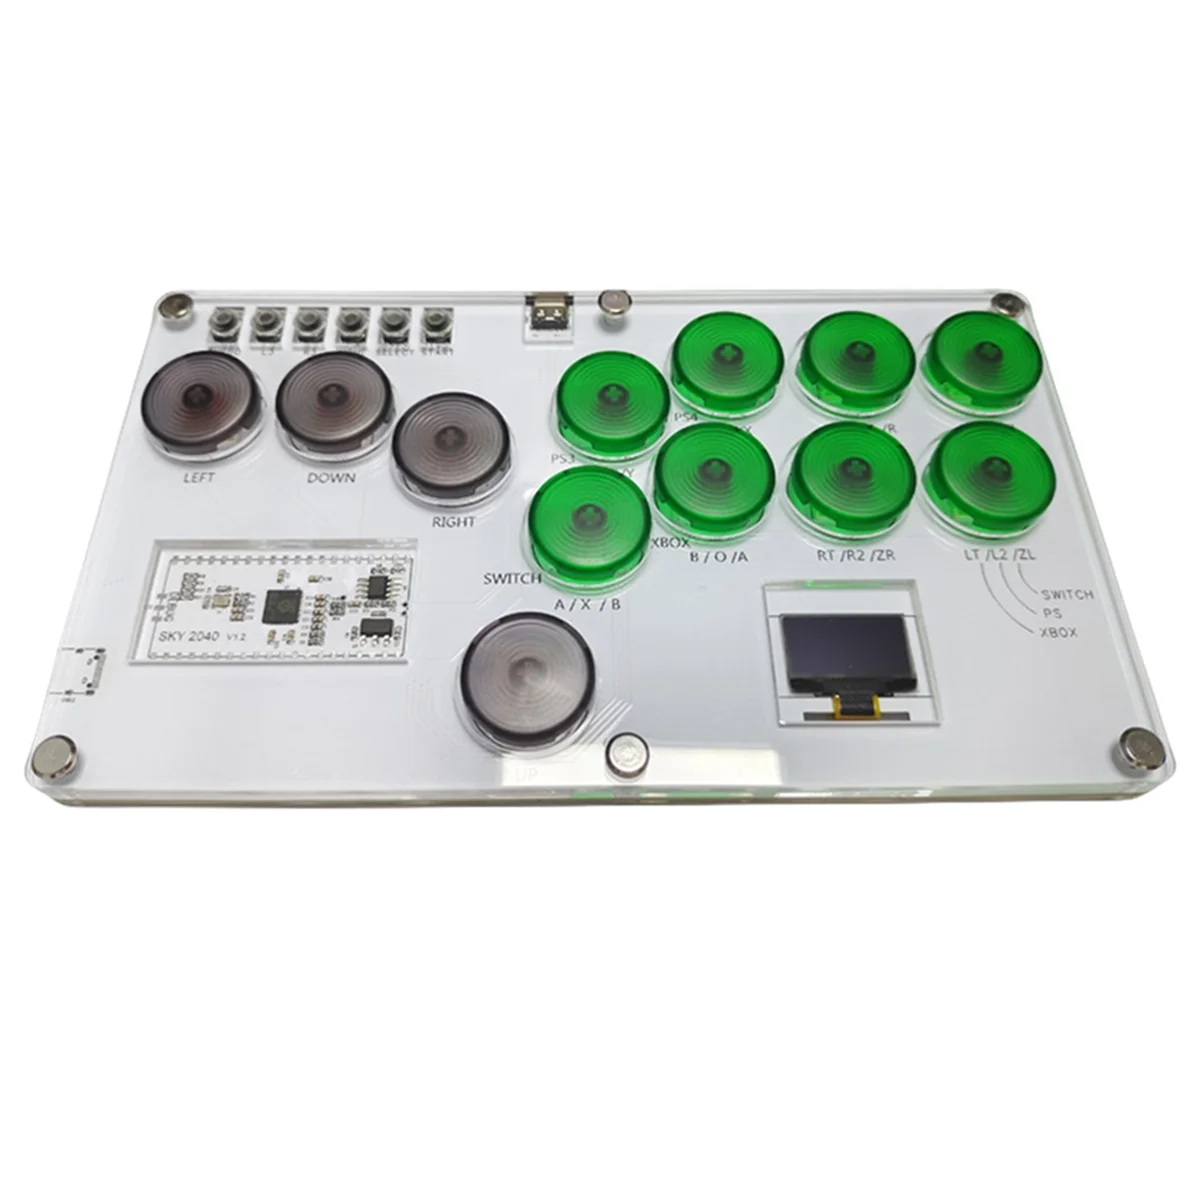 

Arcade Joystick Hitbox Street Fighter Controller Fight Stick Game Controller Mechanical Button for PC/PS4/Switch ,Green